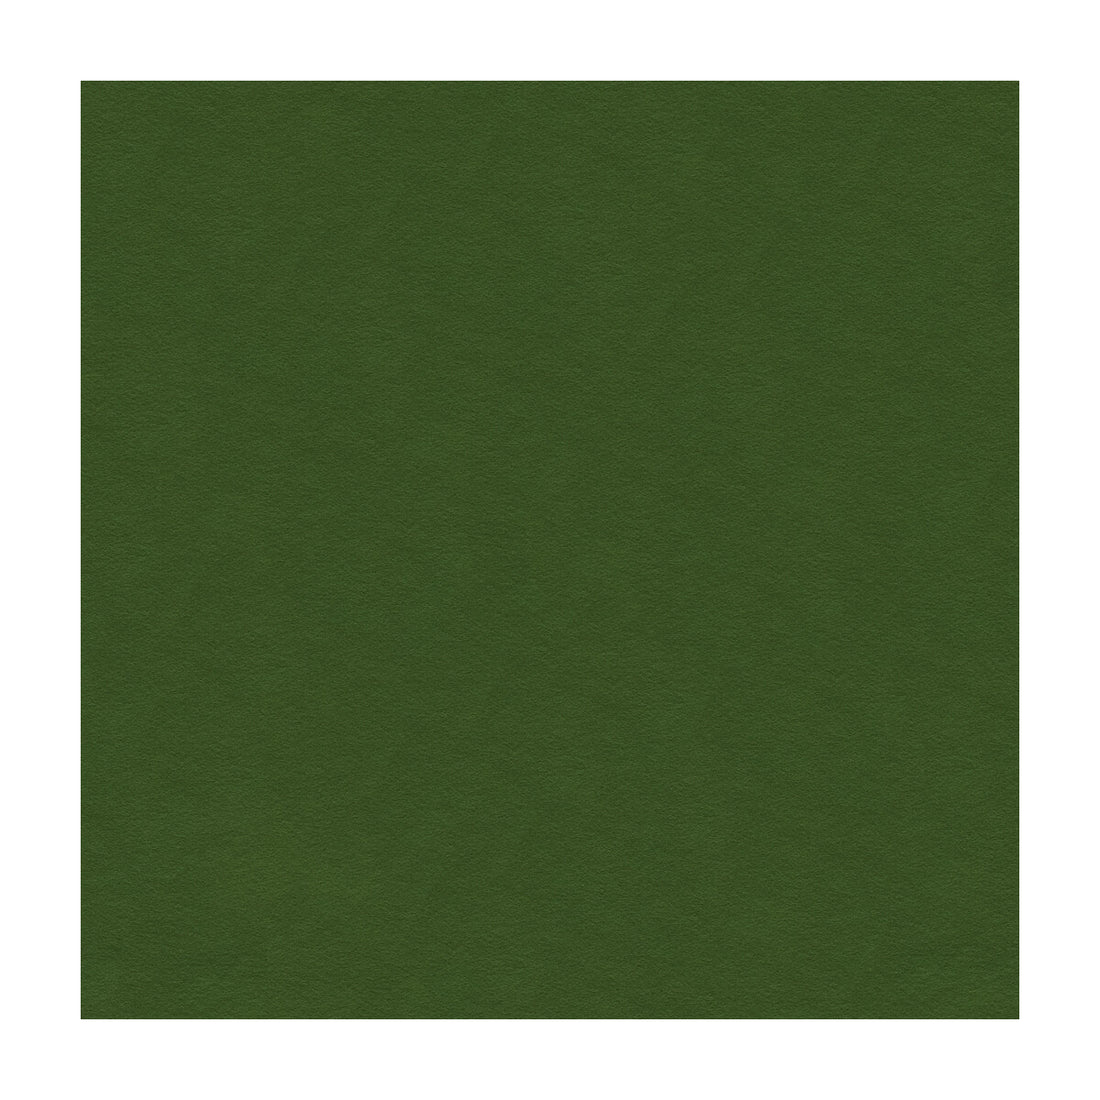 Ultrasuede Green fabric in army color - pattern 30787.3.0 - by Kravet Design in the Performance collection